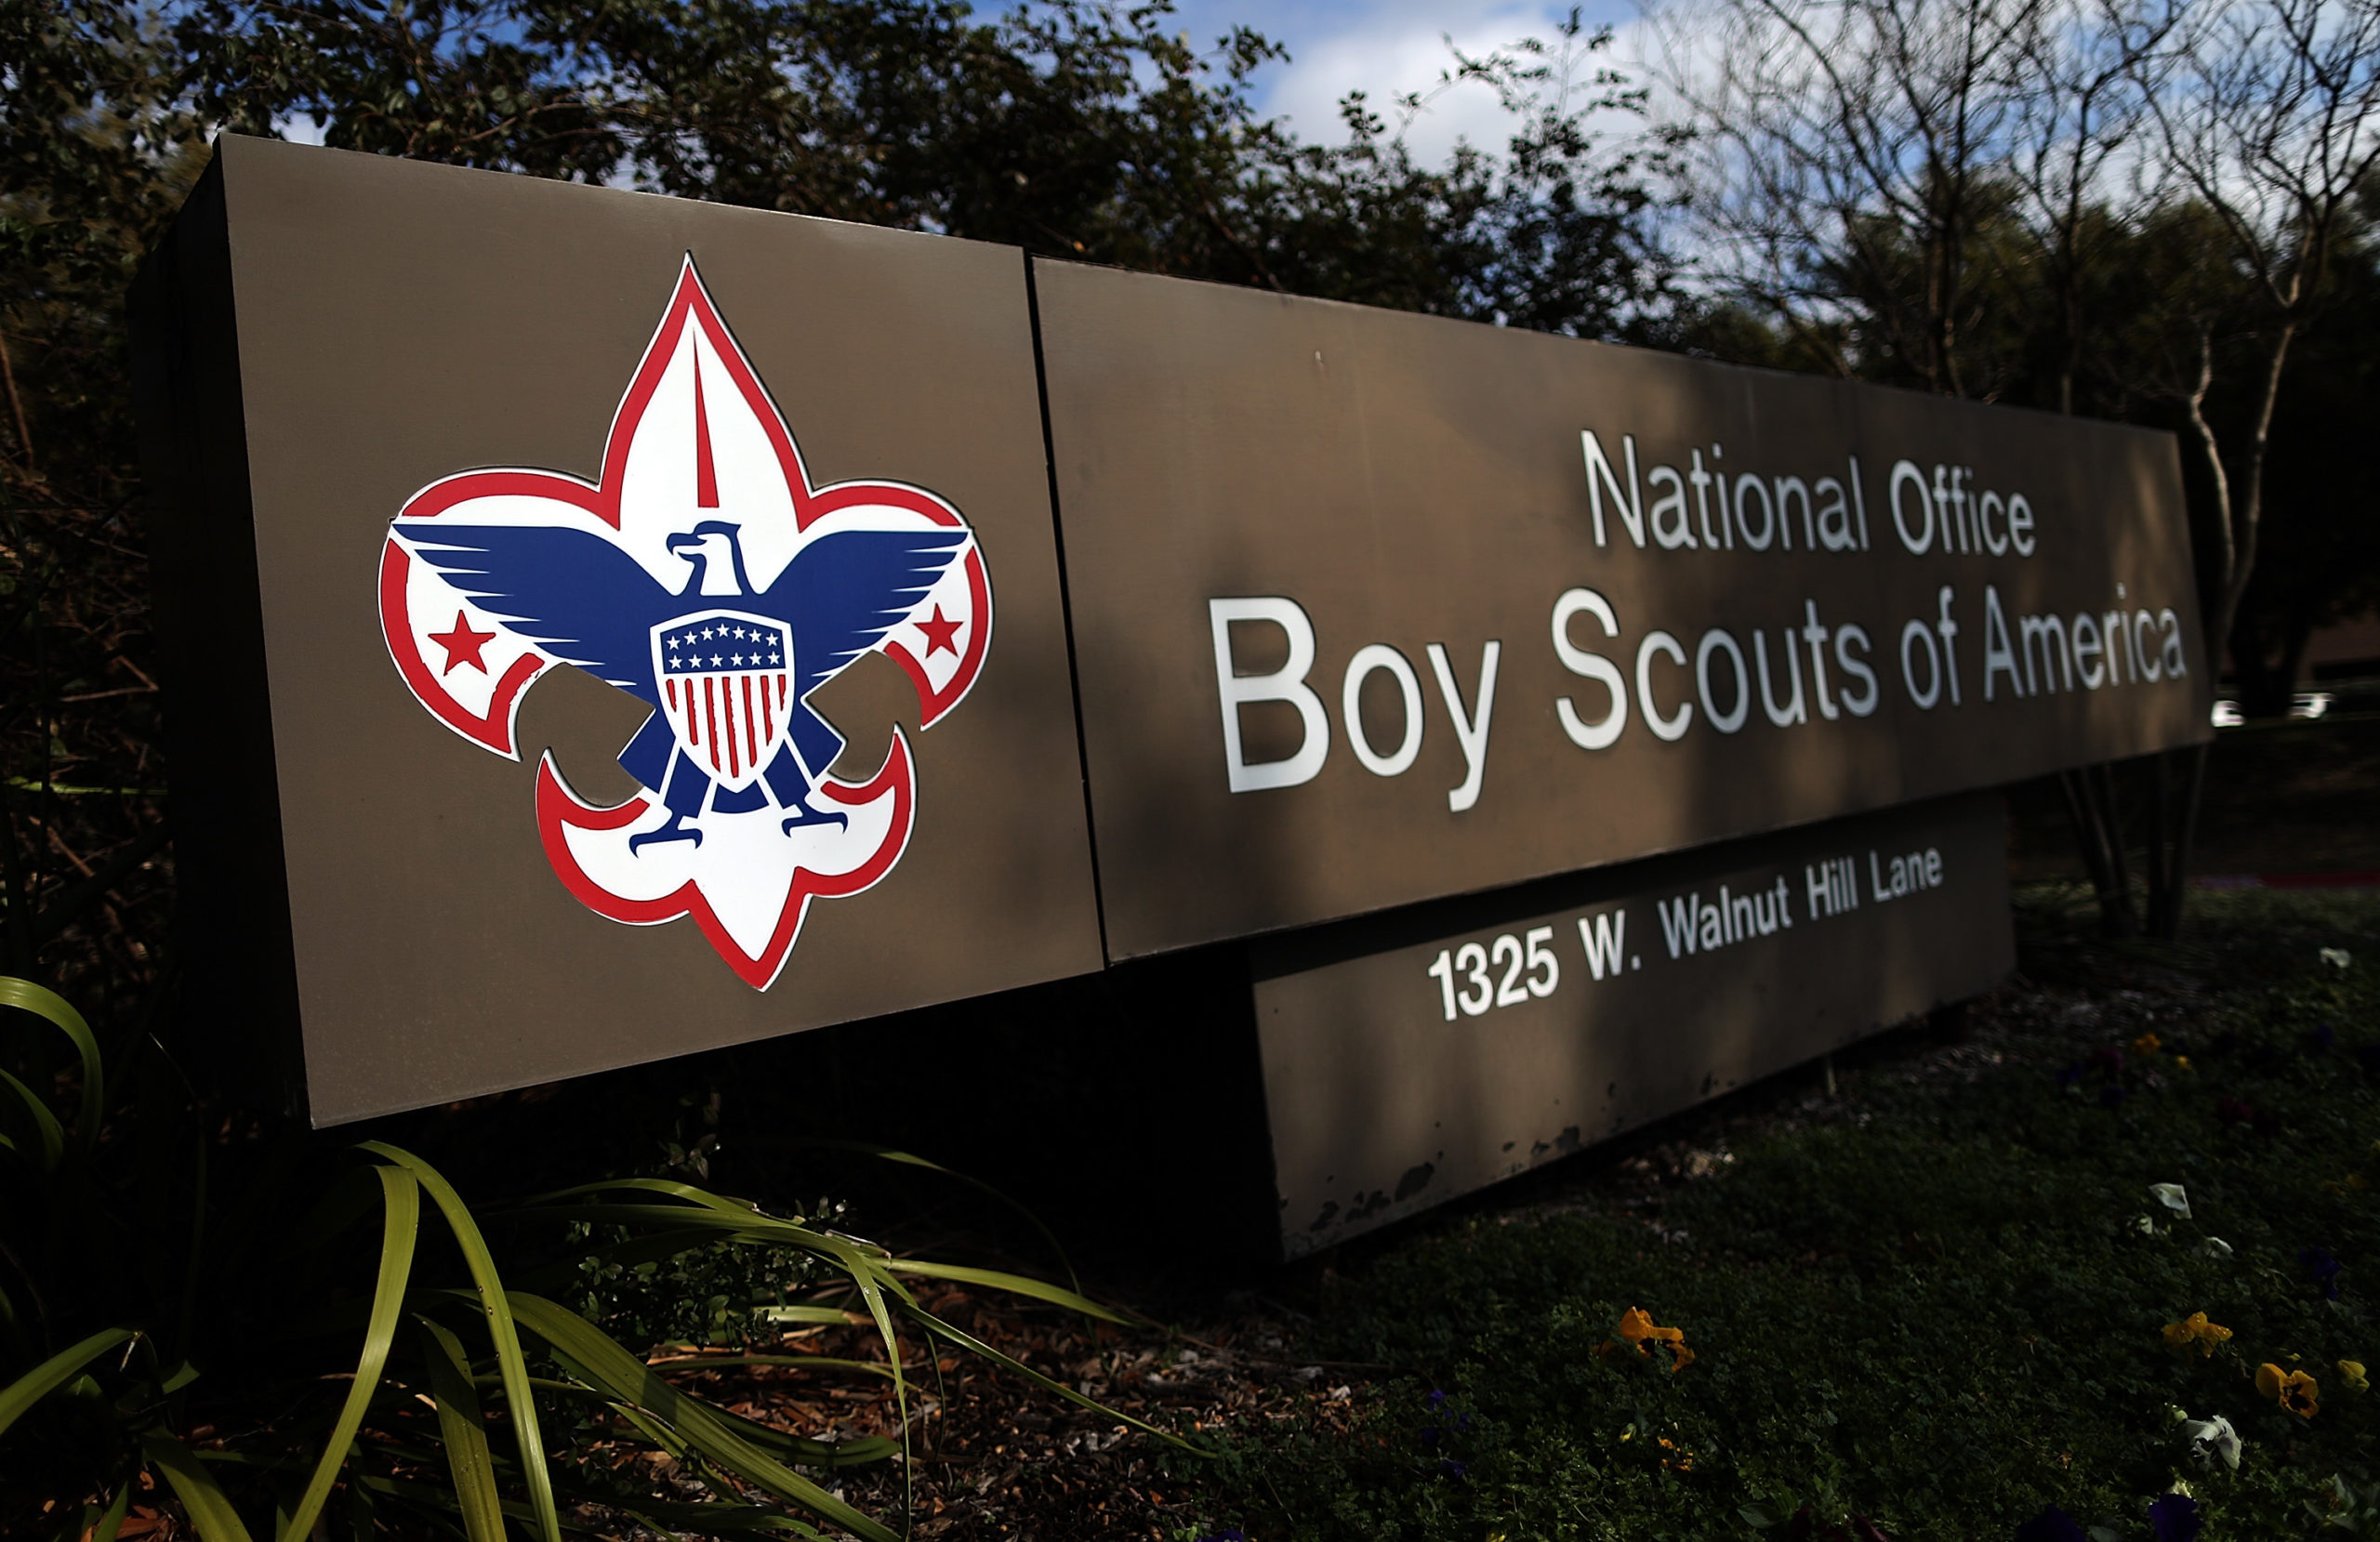 A sign for the National Office outside the Boy Scouts of America Headquarters on February 4, 2013 in Irving, Texas. (Photo by Tom Pennington/Getty Images)